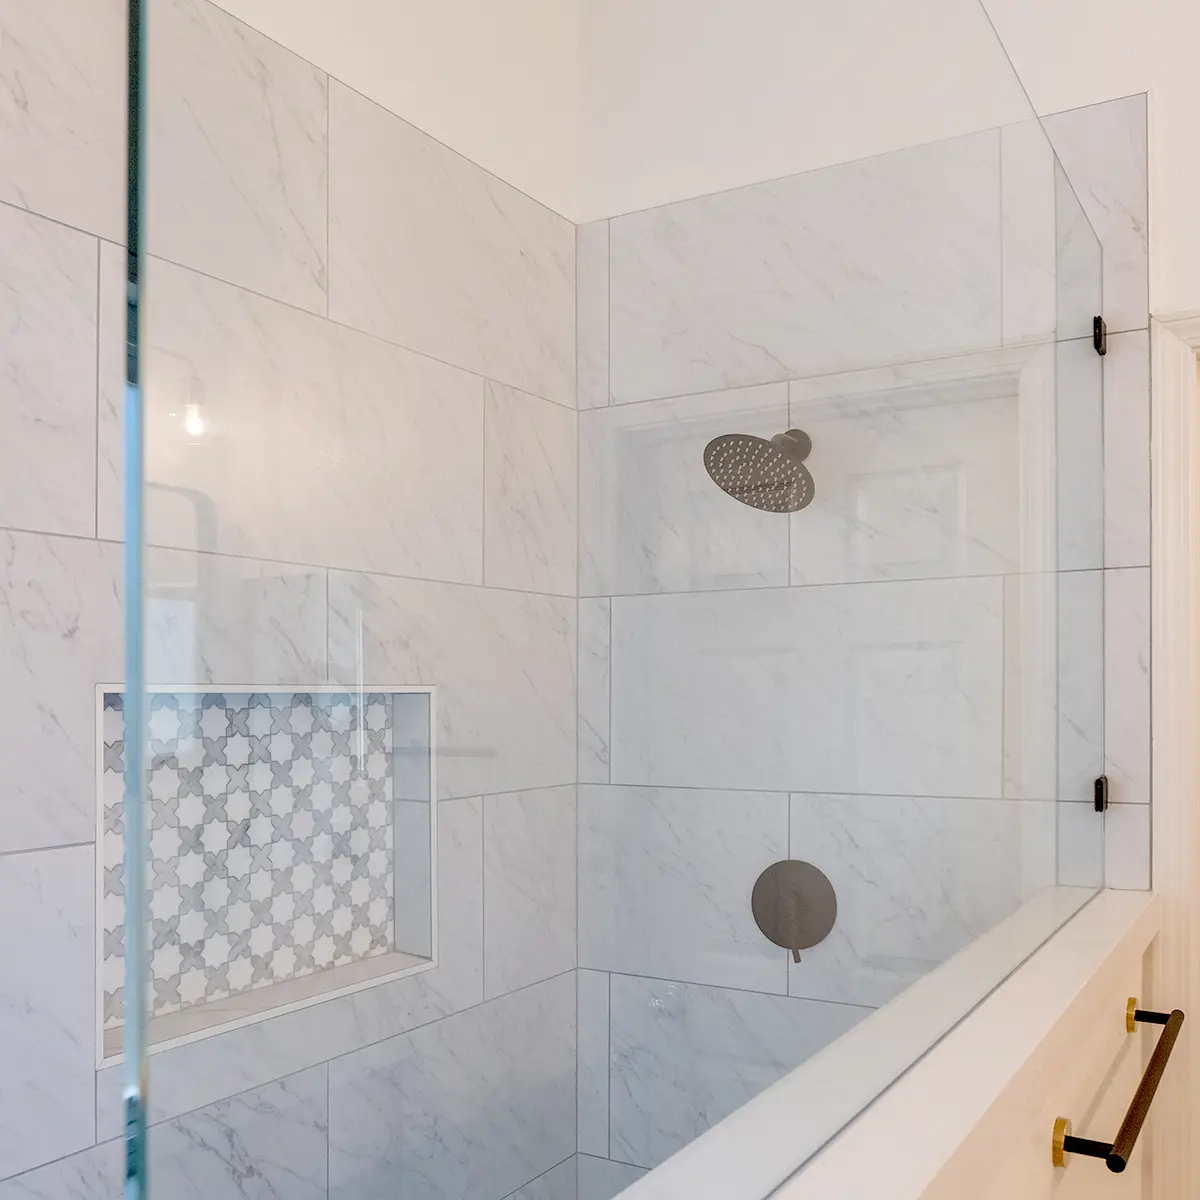 A new walk-in shower with white large tile surround